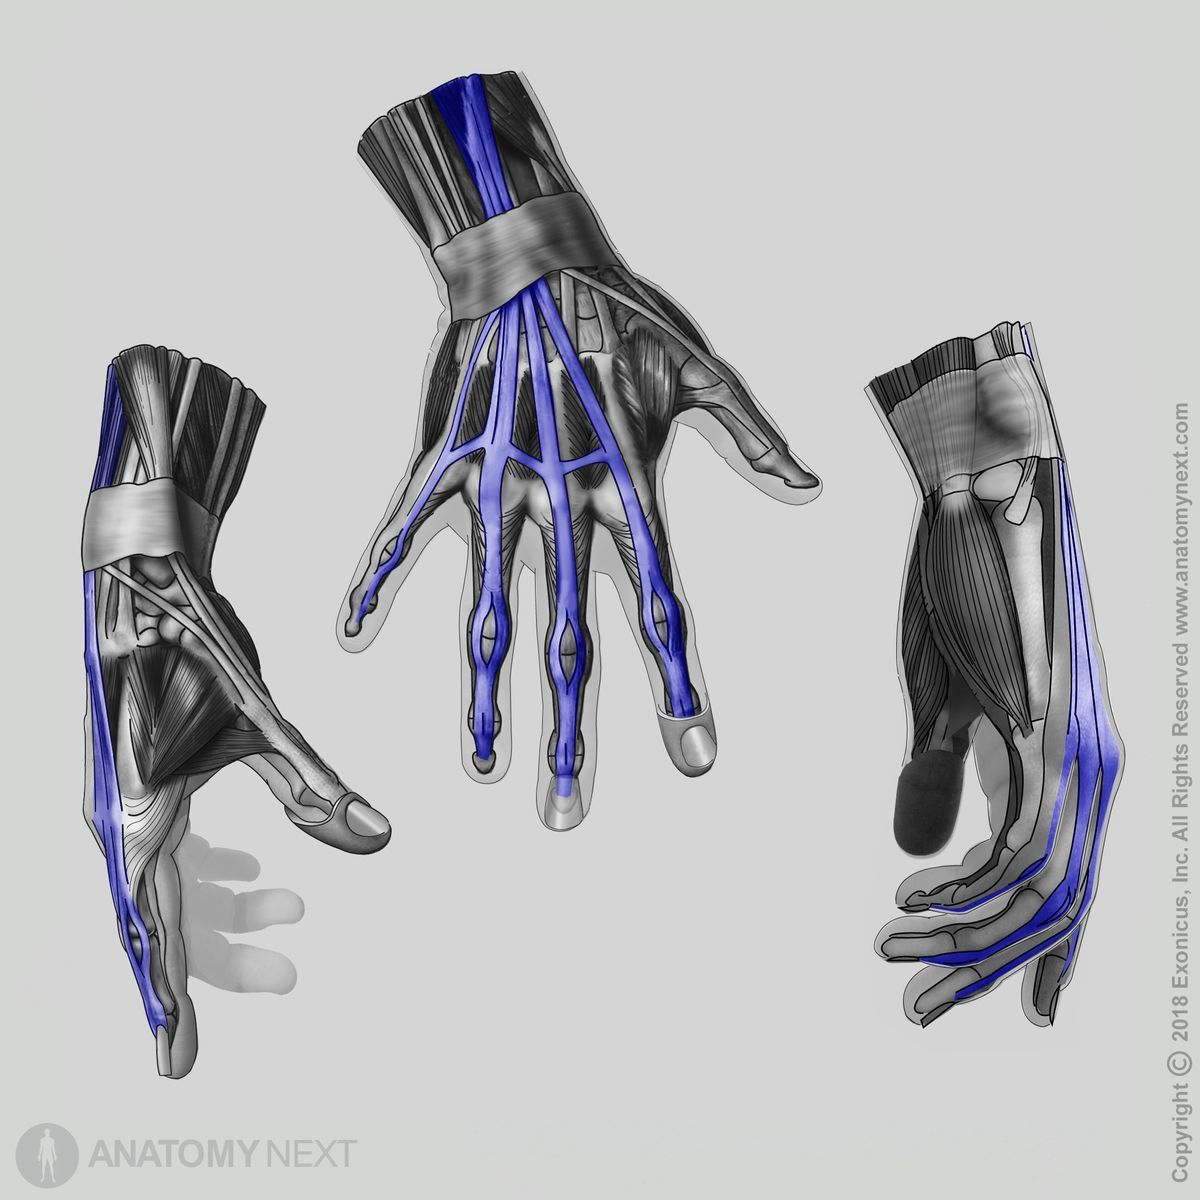 Extensor digitorum, Forearm muscles, Muscles of the forearm, Posterior compartment, Posterior compartment muscles, Posterior compartment of forearm, Human hand, Finger extension, Function of extensor digitorum, Action of extensor digitorum